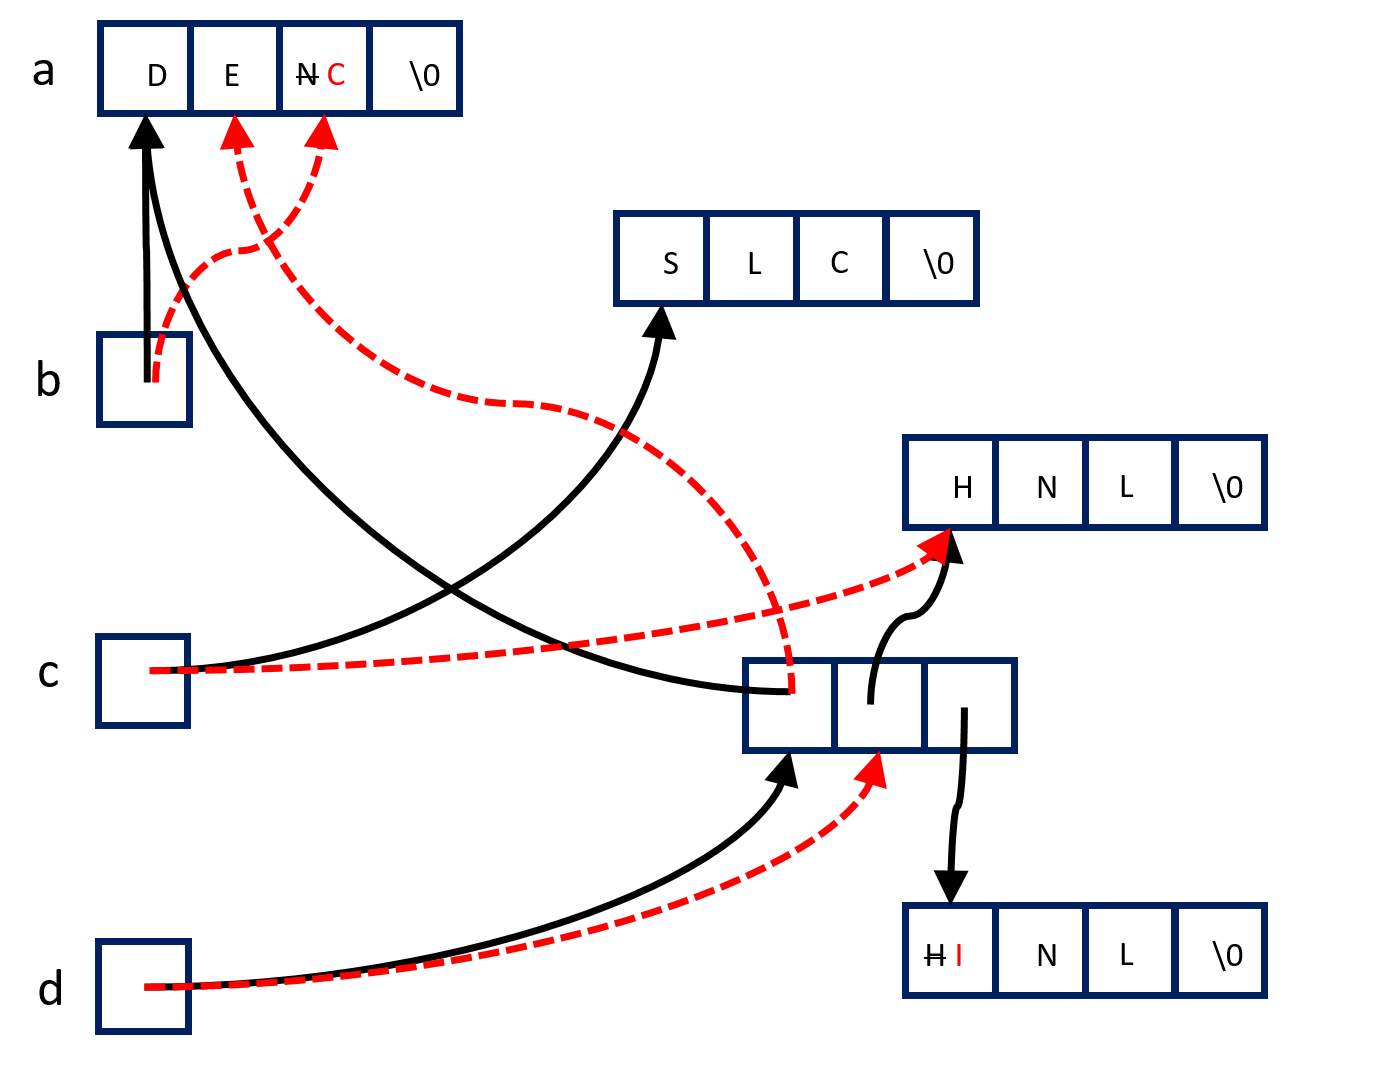 memory diagram with pointers: initially a is a string DEN; b points to the beginning of a; c points
to the string SLC, d points to an array of 3 pointers pointing to a, a string HNL, and another string HNL; change the N in DEN to C; change b to point to that C, channge c to point to the 1st HNL; change the first pointer in the array d initially points to to point to the E in DEN; change d to point to the second element of the array it initially points to the first element of